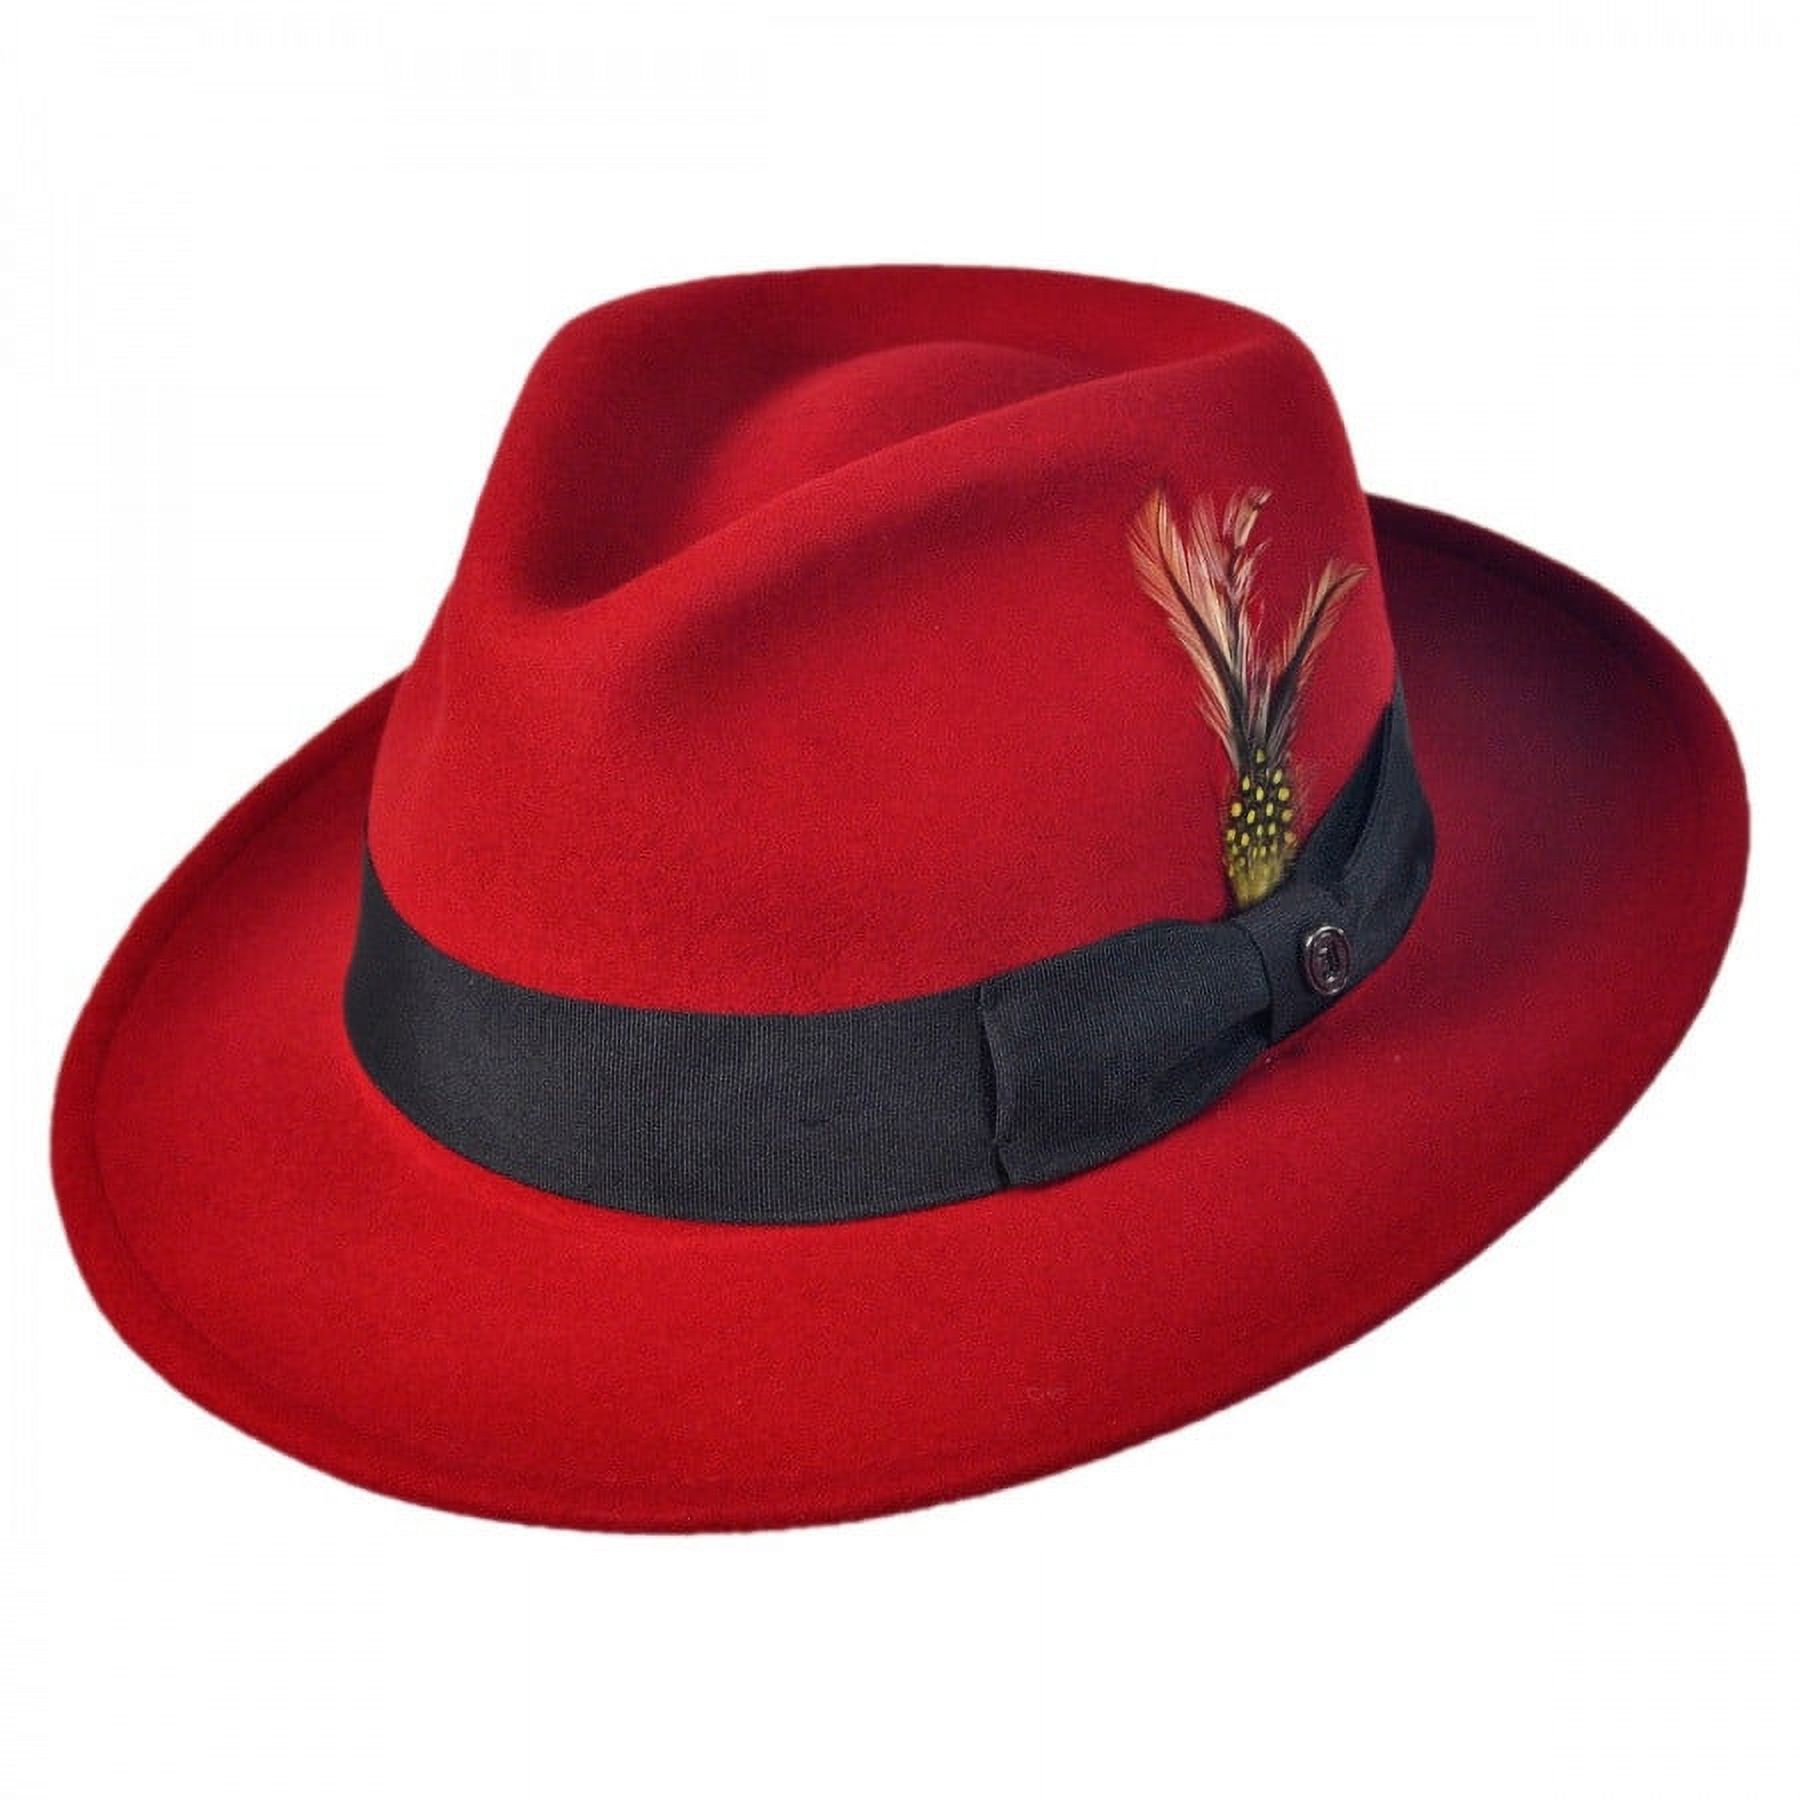 Pachuco Crushable Wool Felt Fedora Hat - L - Red - image 1 of 6